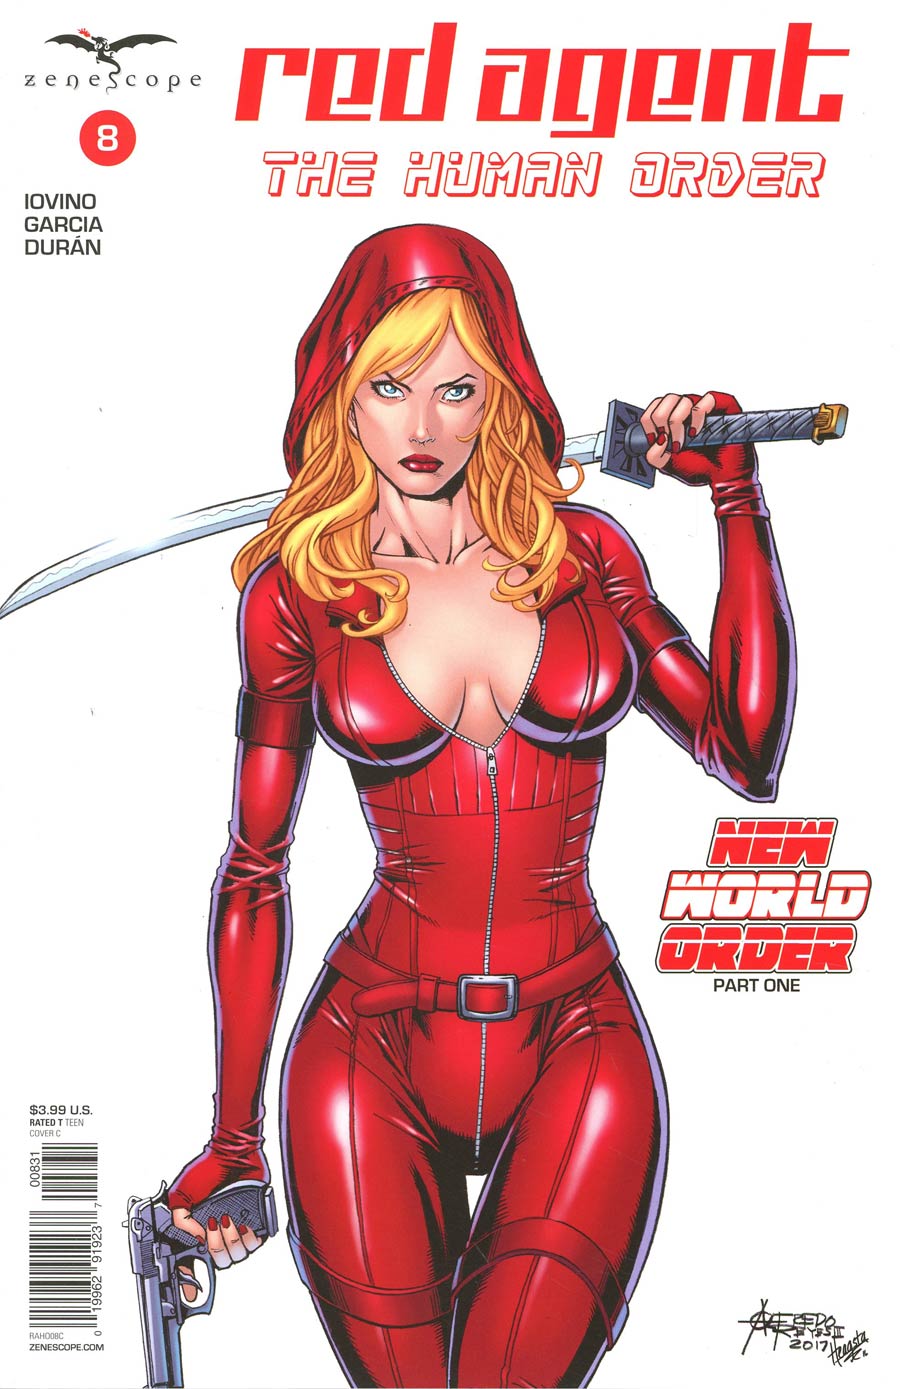 Grimm Fairy Tales Presents Red Agent Human Order #8 Cover C Alfredo Reyes